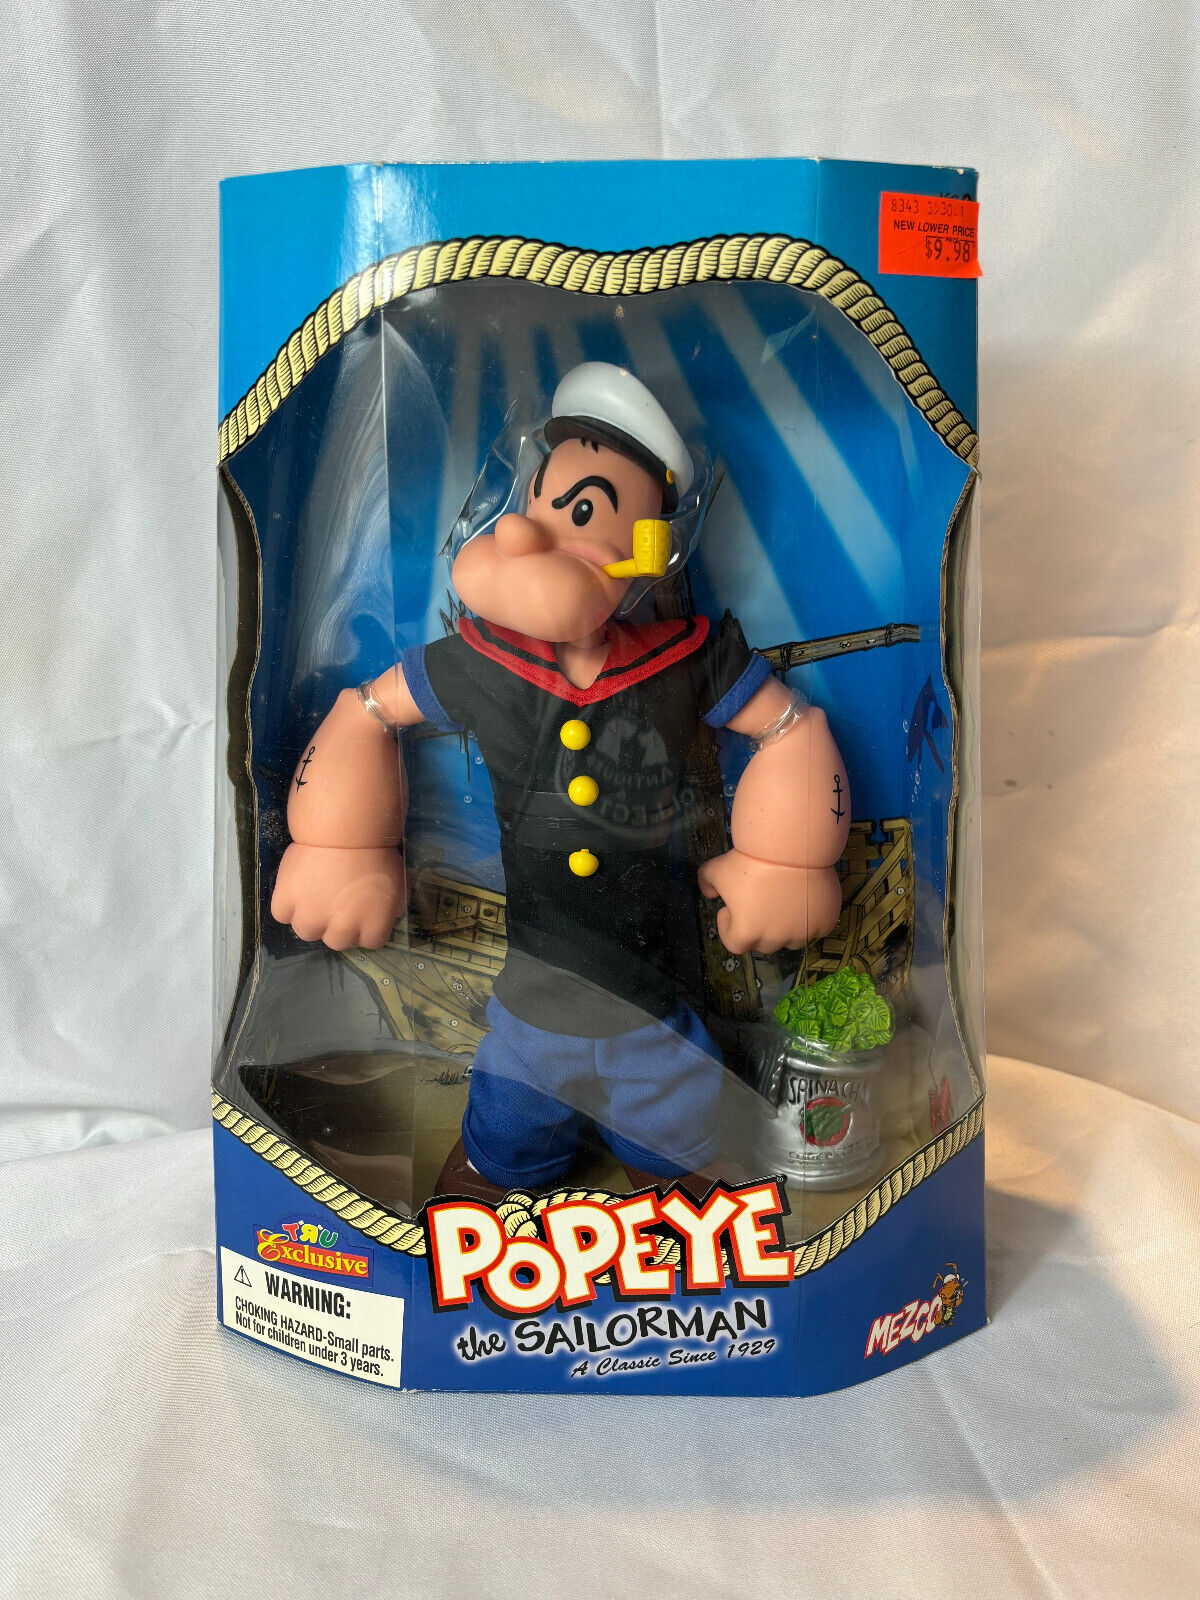 2001 Mezco Toyz POPEYE The Sailor Man Doll Toy Figure FACTORY SEALED In Box